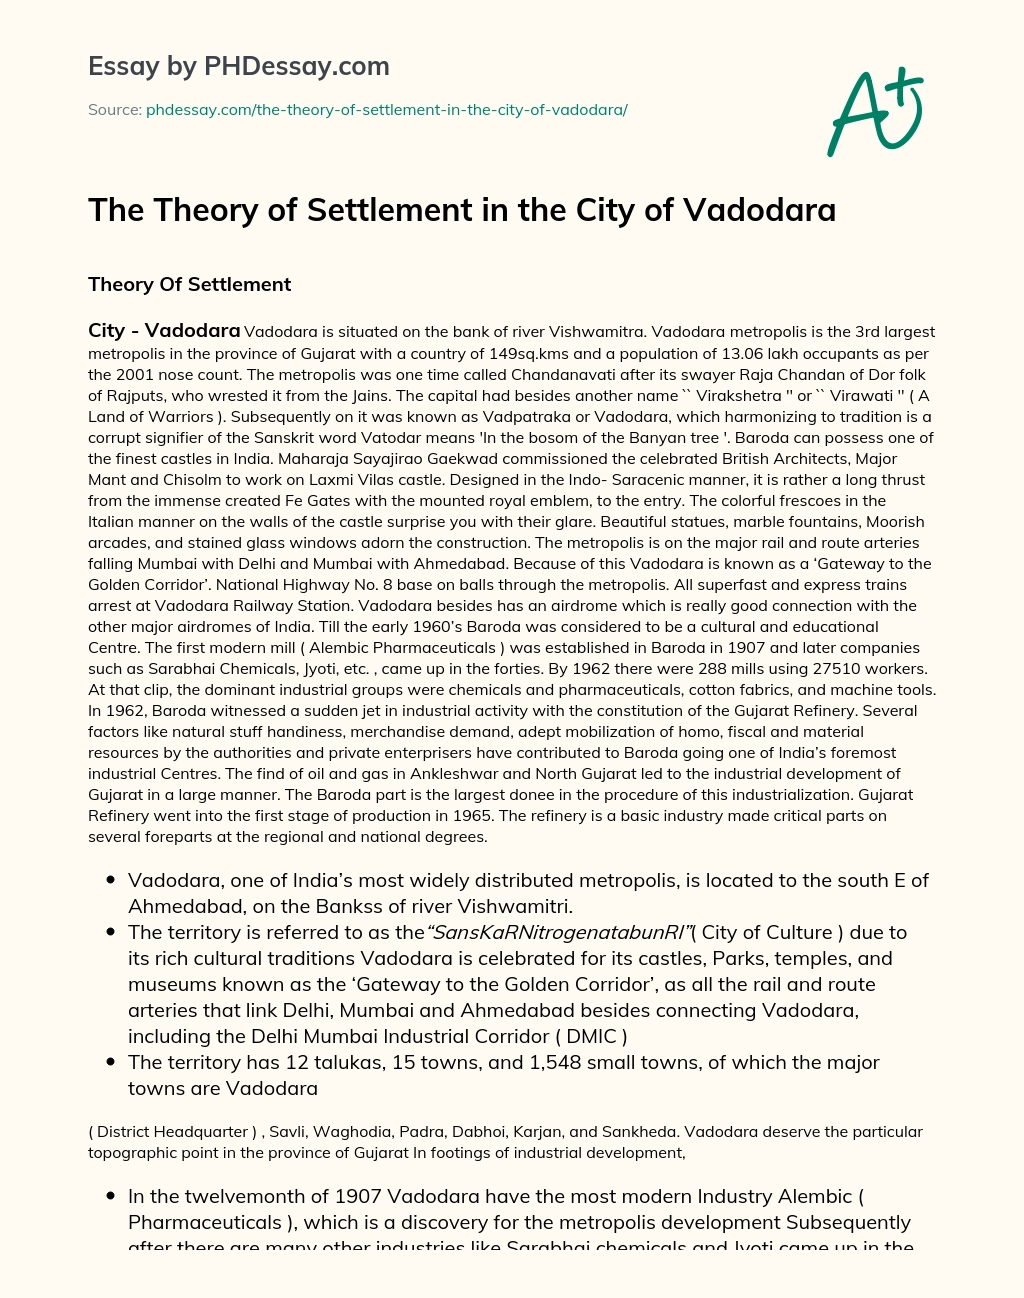 The Theory of Settlement in the City of Vadodara essay